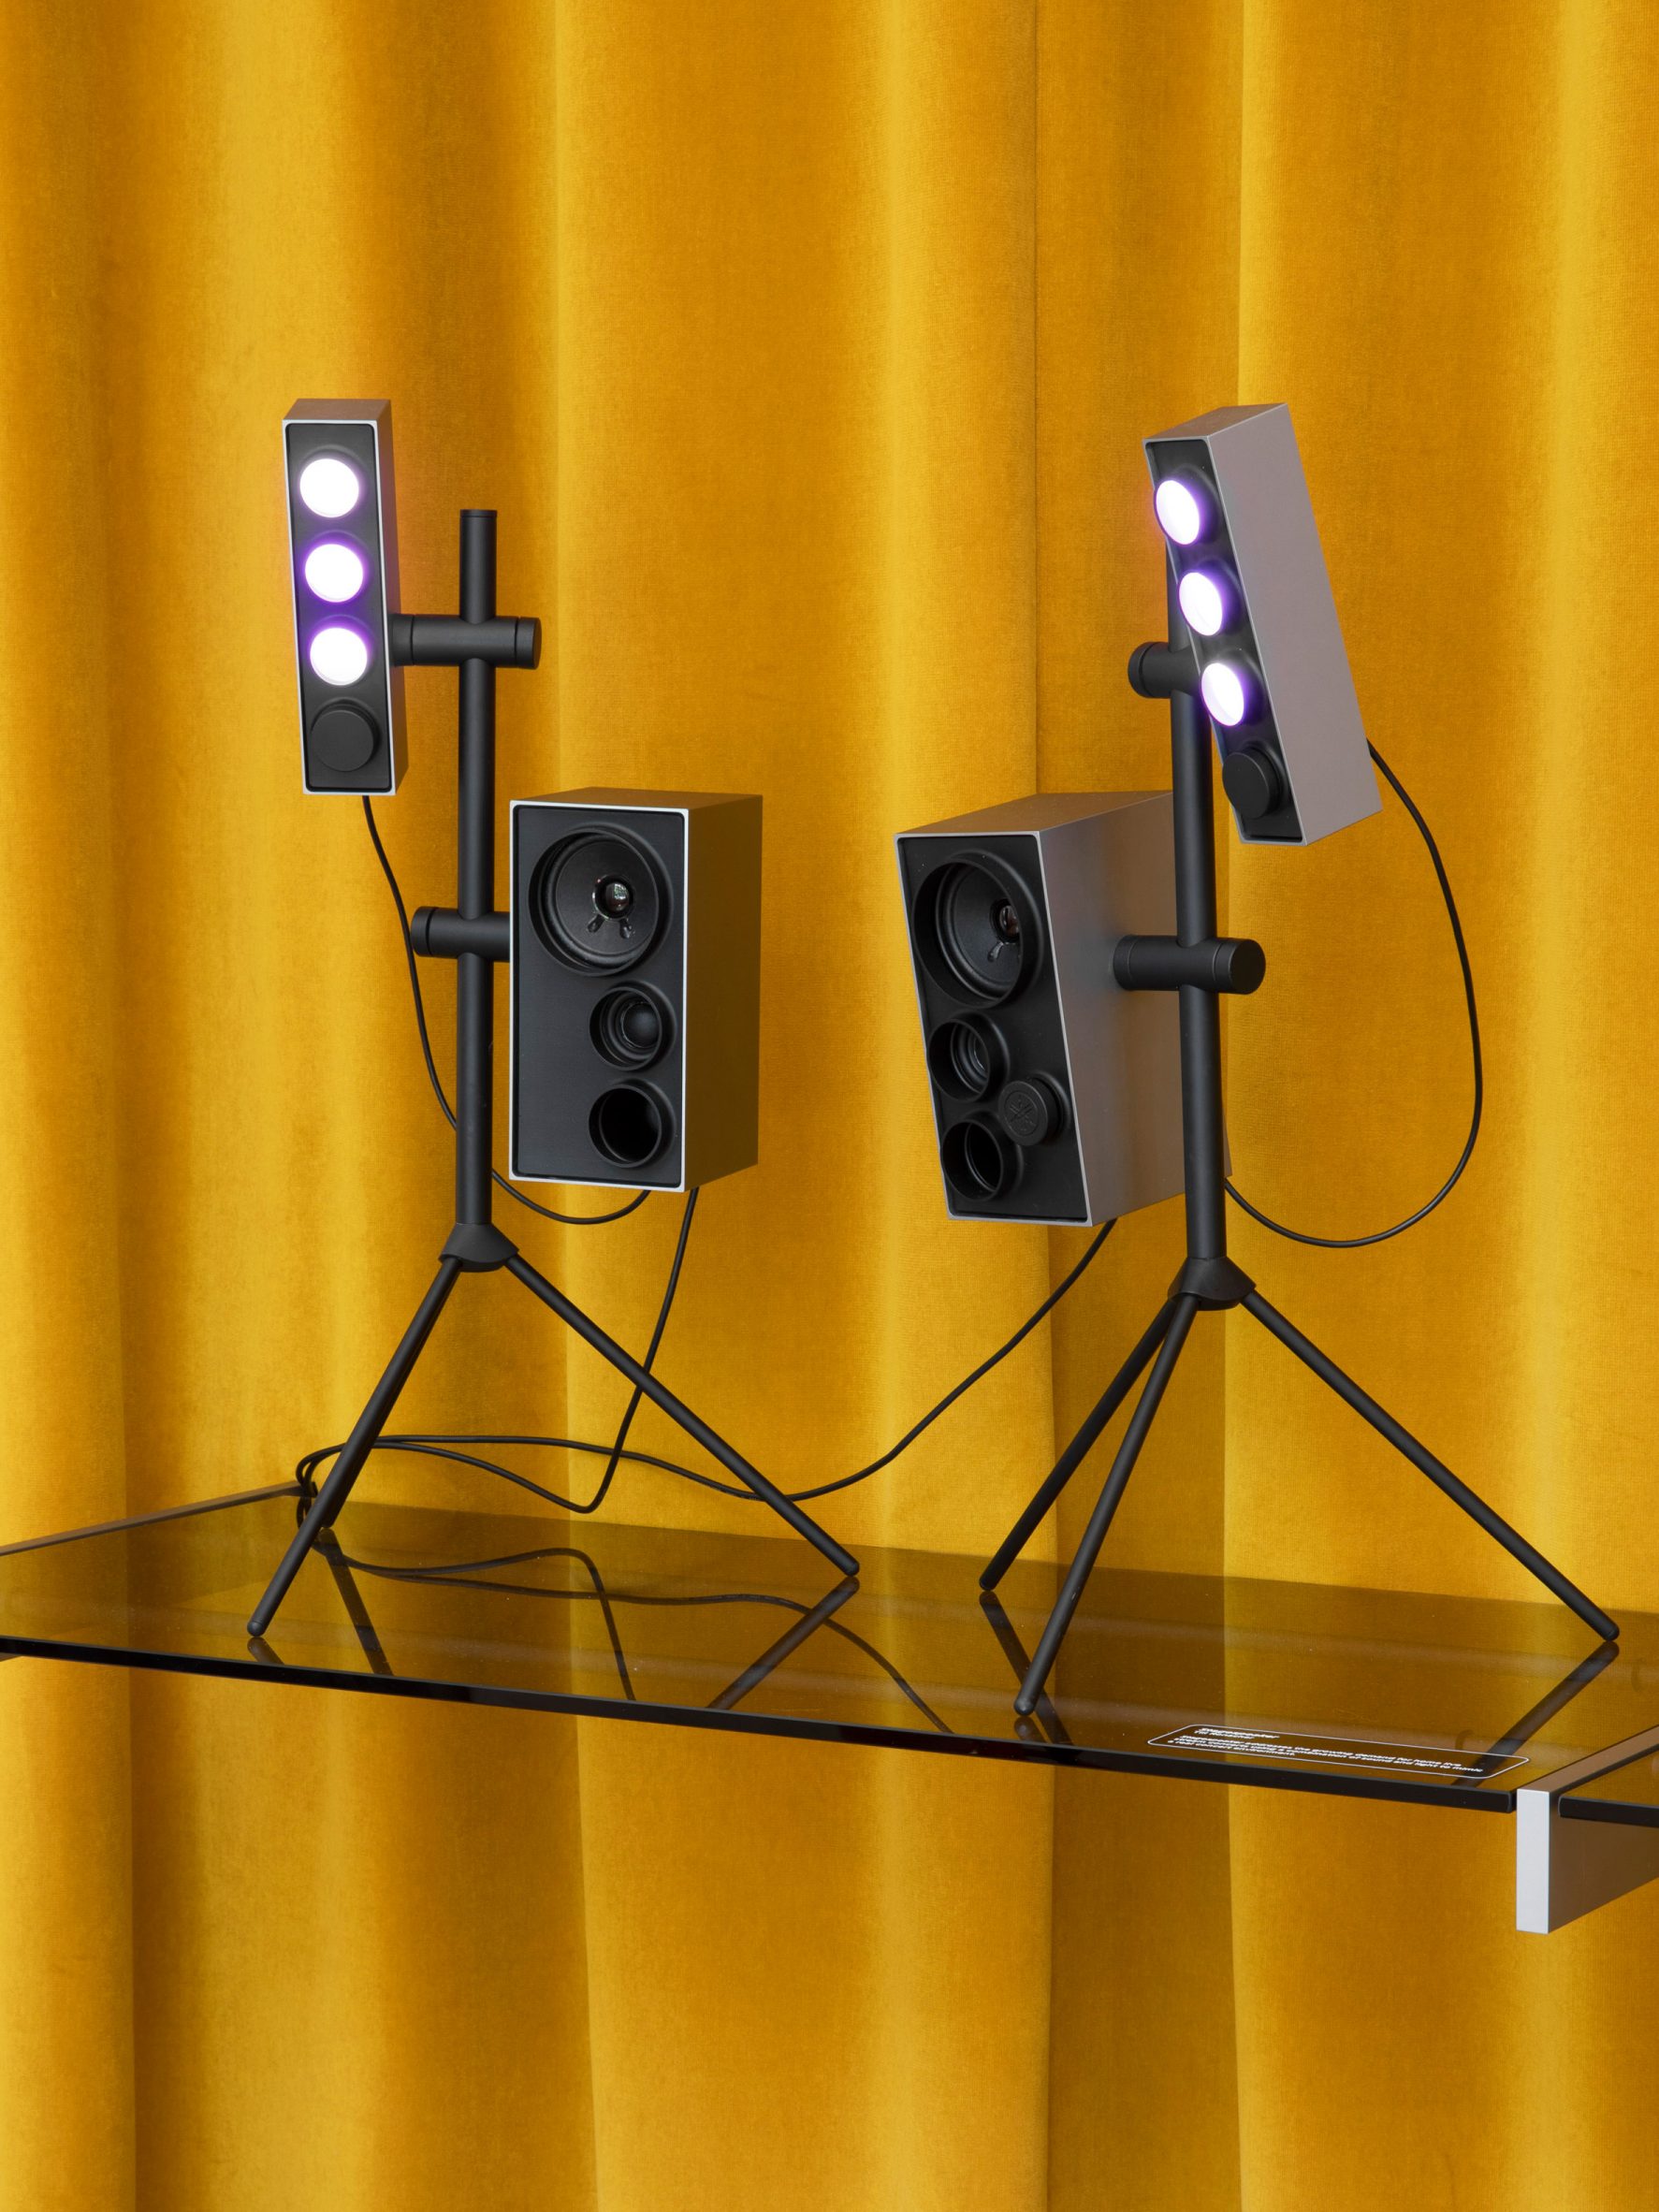 A music player that looks like a small concert stage